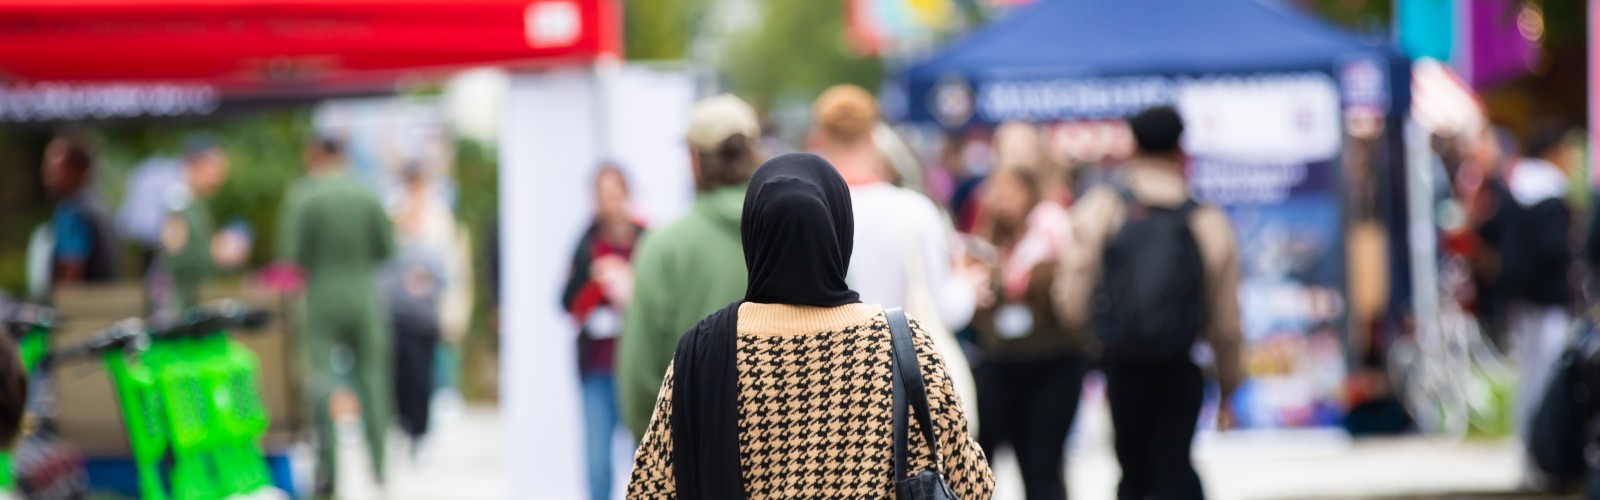 Photograph of Welcome Week at the University of Salford, outside, with a person in a headscarf in the centre of the frame, facing away from the camera. Stalls can be seen in the background.